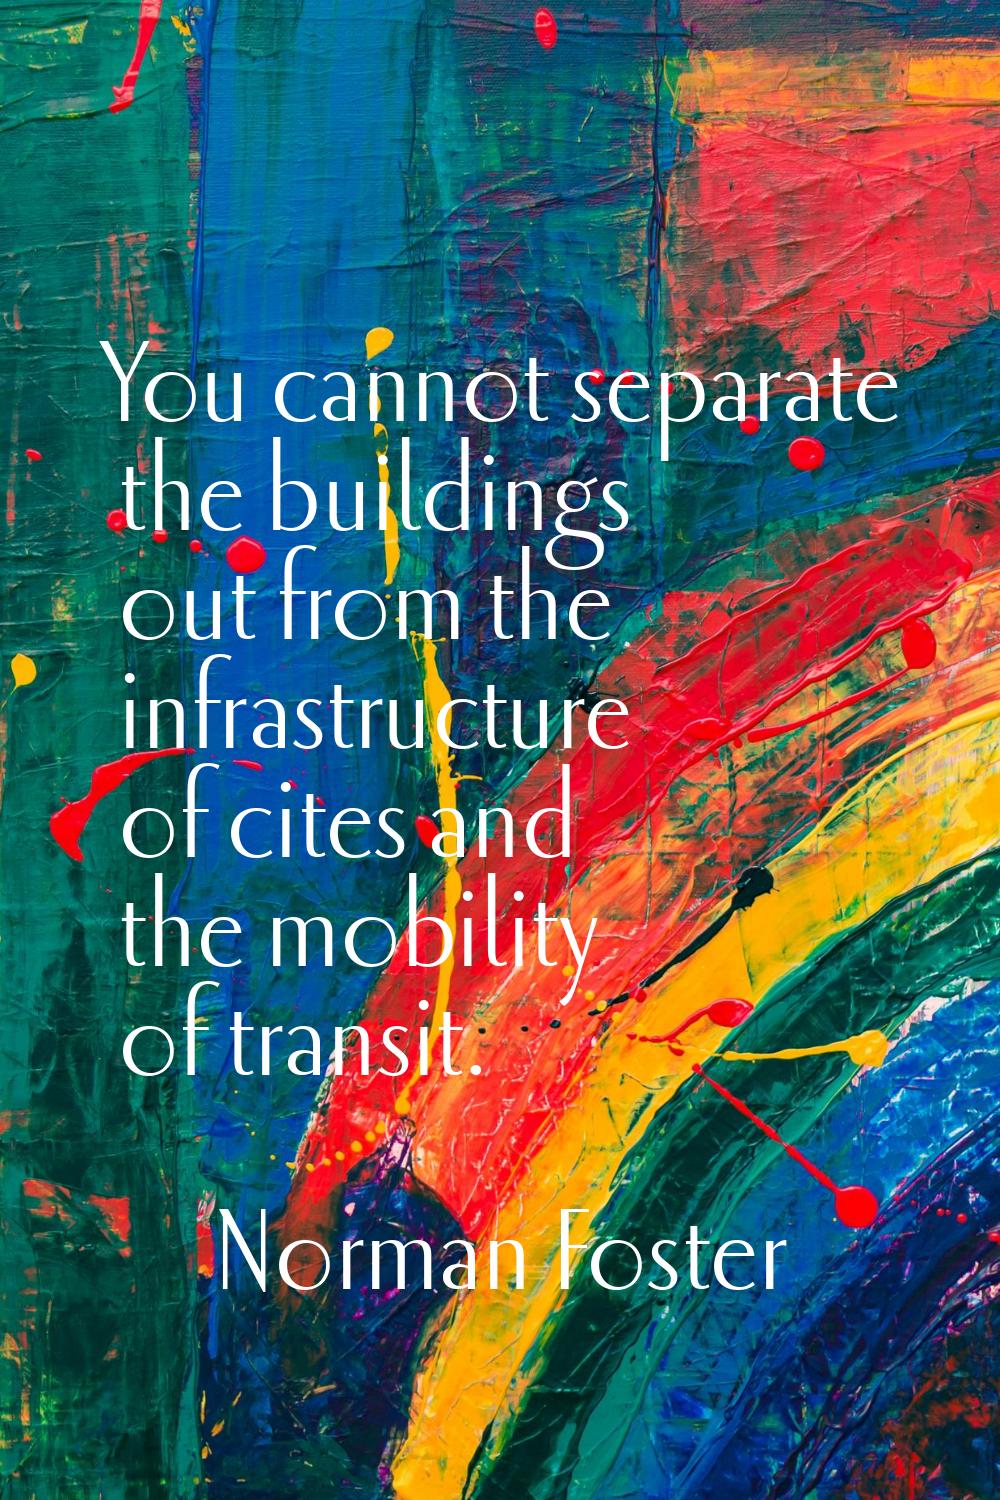 You cannot separate the buildings out from the infrastructure of cites and the mobility of transit.